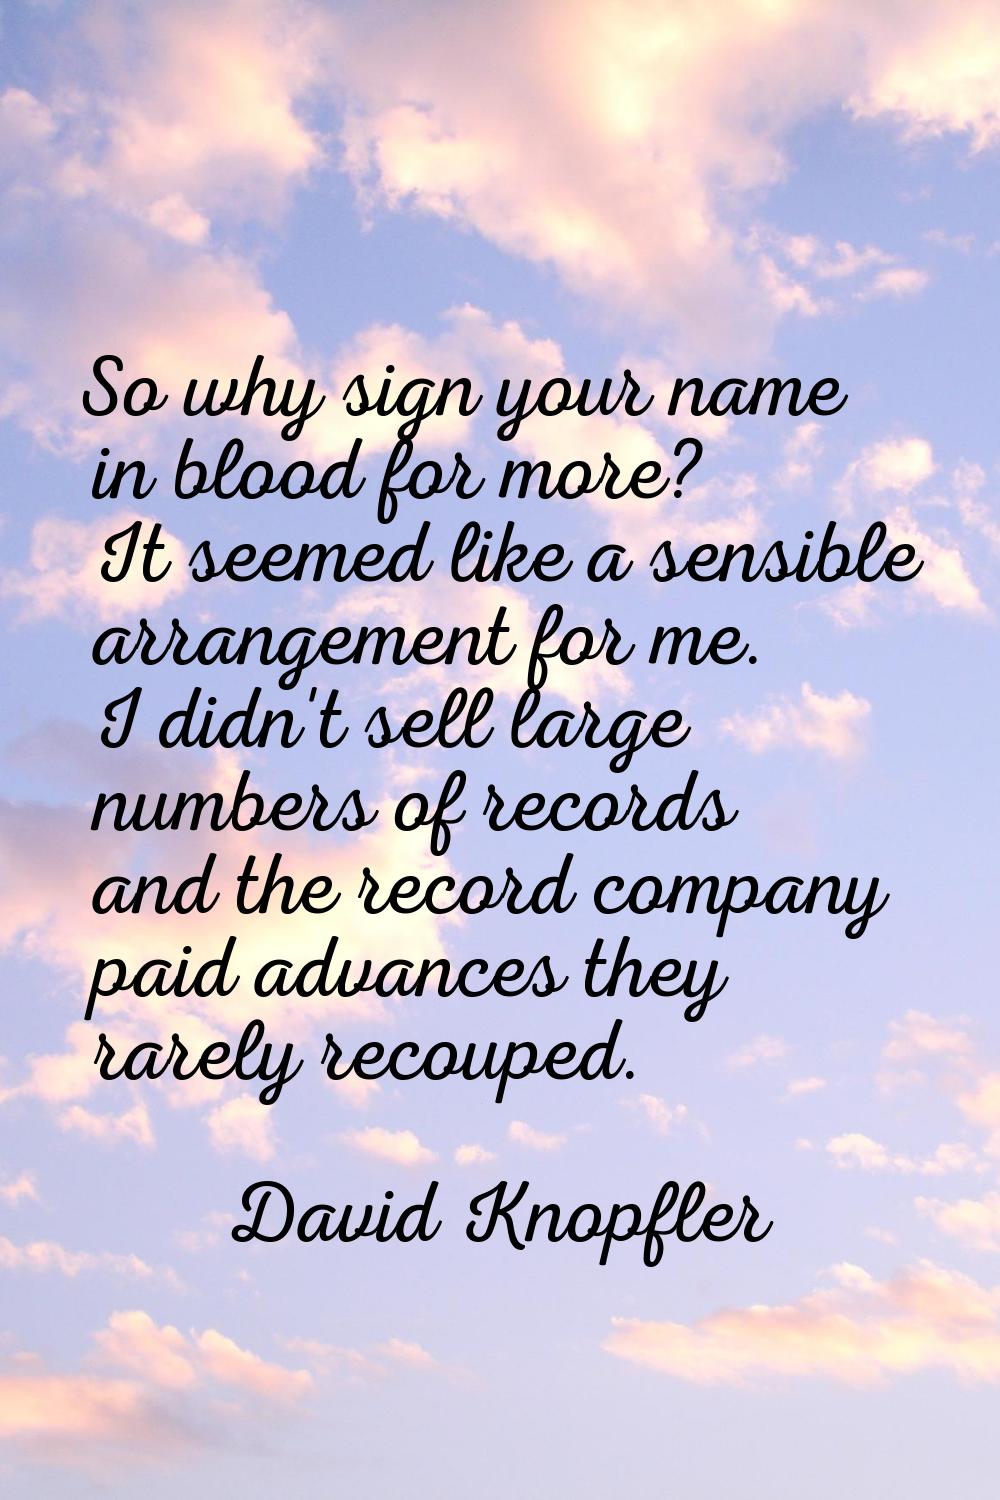 So why sign your name in blood for more? It seemed like a sensible arrangement for me. I didn't sel